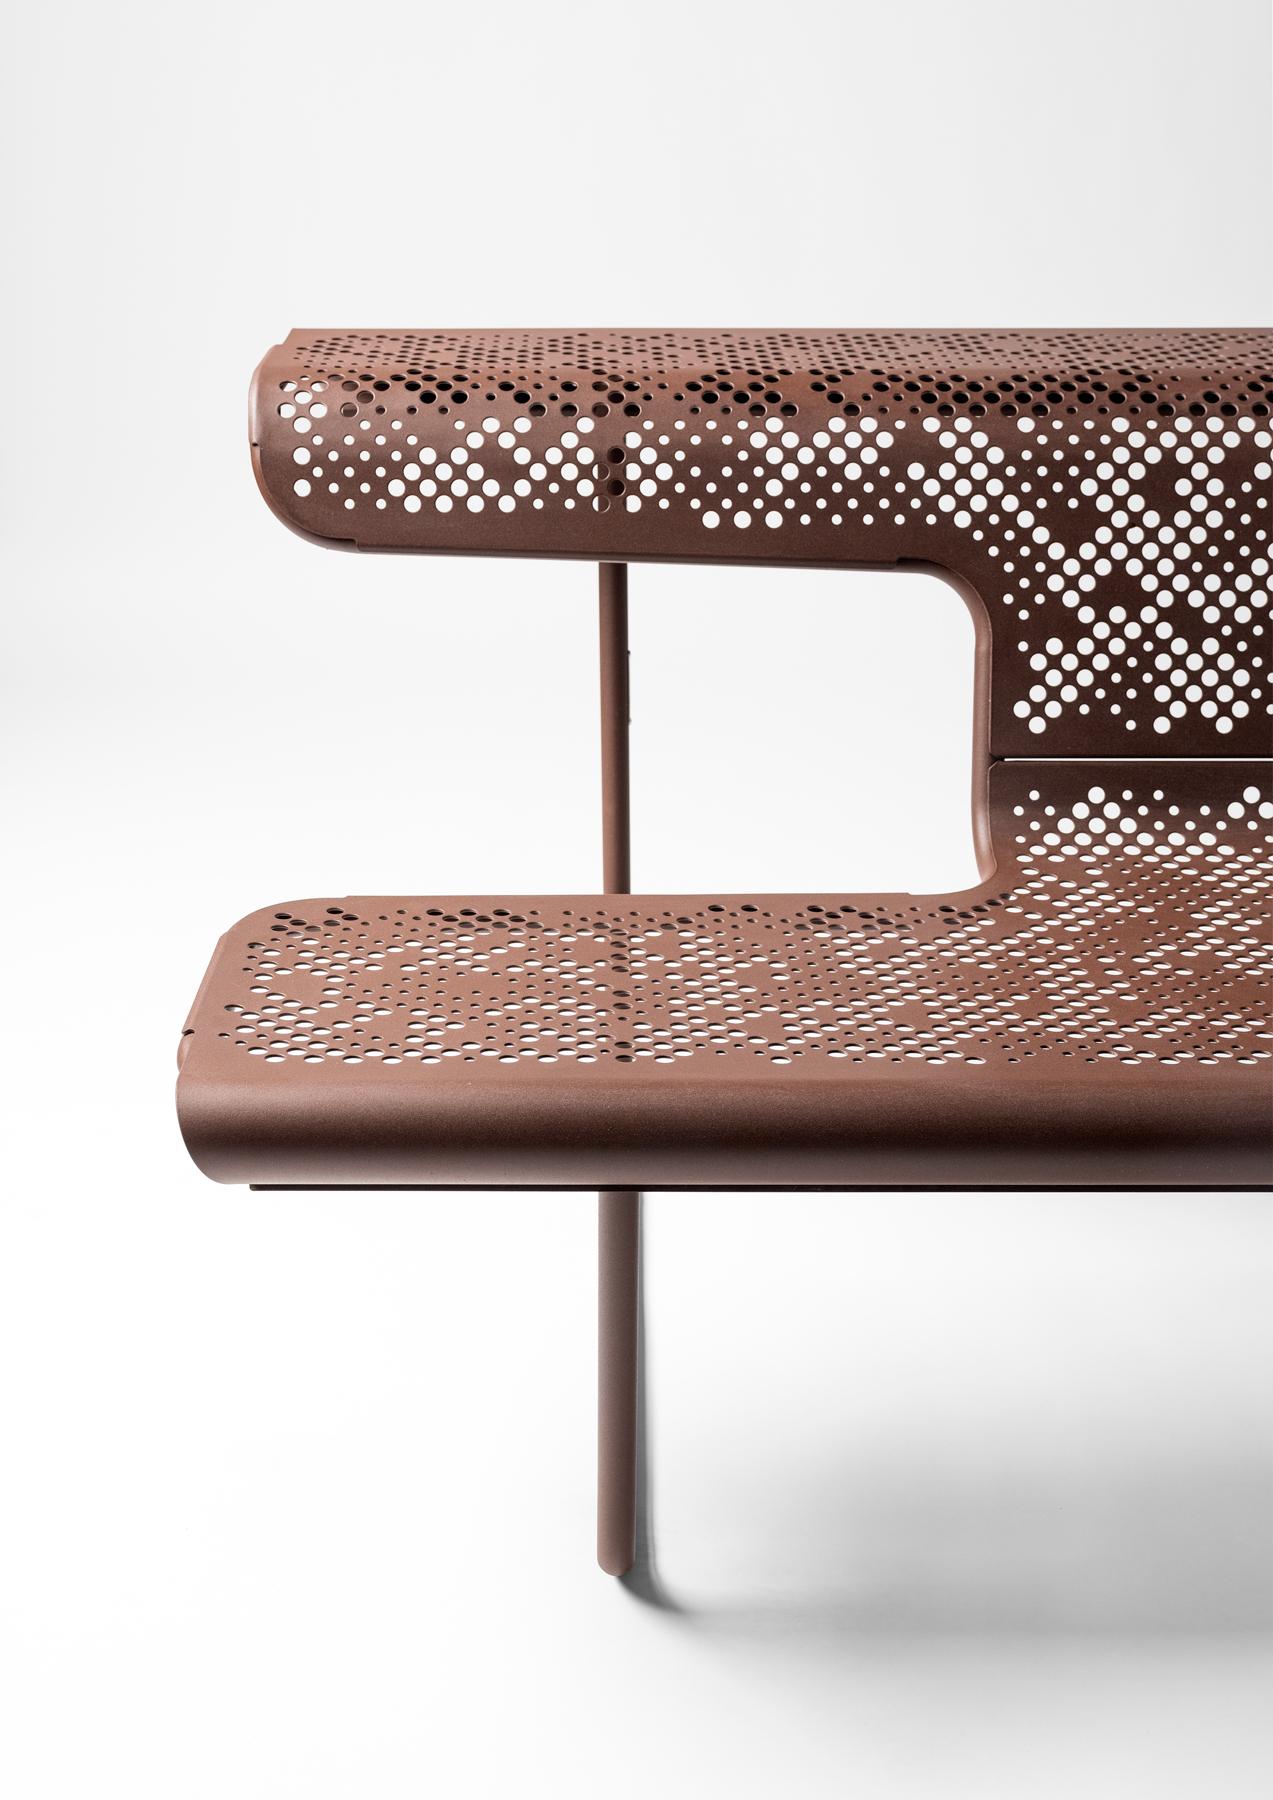 Alfredo Haberli is a great admirer of designs by Oscar Tusquets and Lluis Clotet. As a tribute to the Catalano and Perforano Benches, he designed the Suizos Benches Collection in perforated painted steel. Out of all the benches, The Poet Bench has